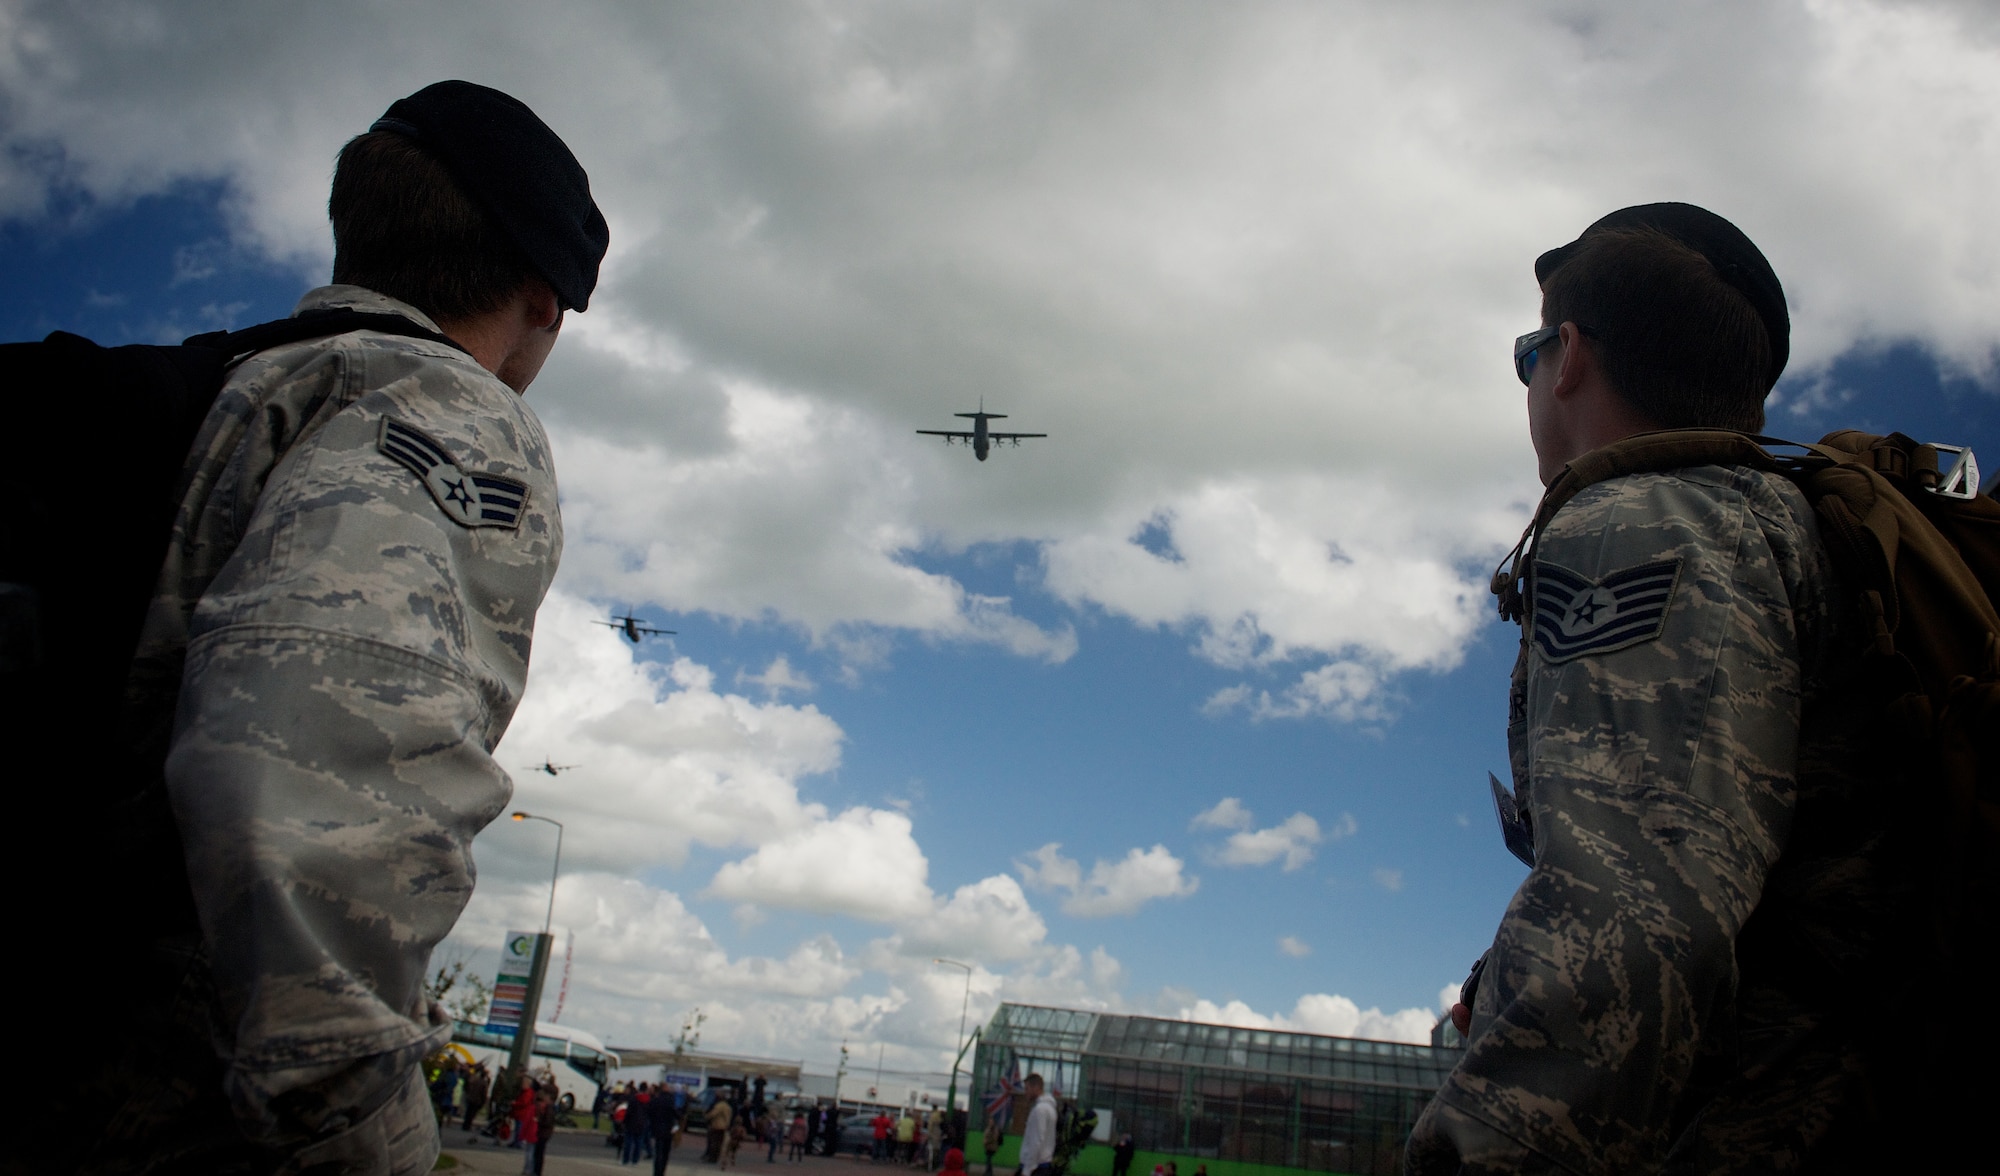 Tech. Sgt. Zachary Jacobs, right, and Senior Airman Jason Hoff watch as C-130 Hercules perform a ceremonial flyover at a 70th D-Day anniversary memorial event, June 4, 2014, in Carentan, France. Jacobs and Hoff are joint terminal attack controllers with the 116th Air Support Operations Squadron, Wash., assigned to Normandy to coordinate air movements during the events celebrating the liberation of Normandy by allied troops in 1944. (U.S. Air Force photo/Senior Airman Alexander W. Riedel)